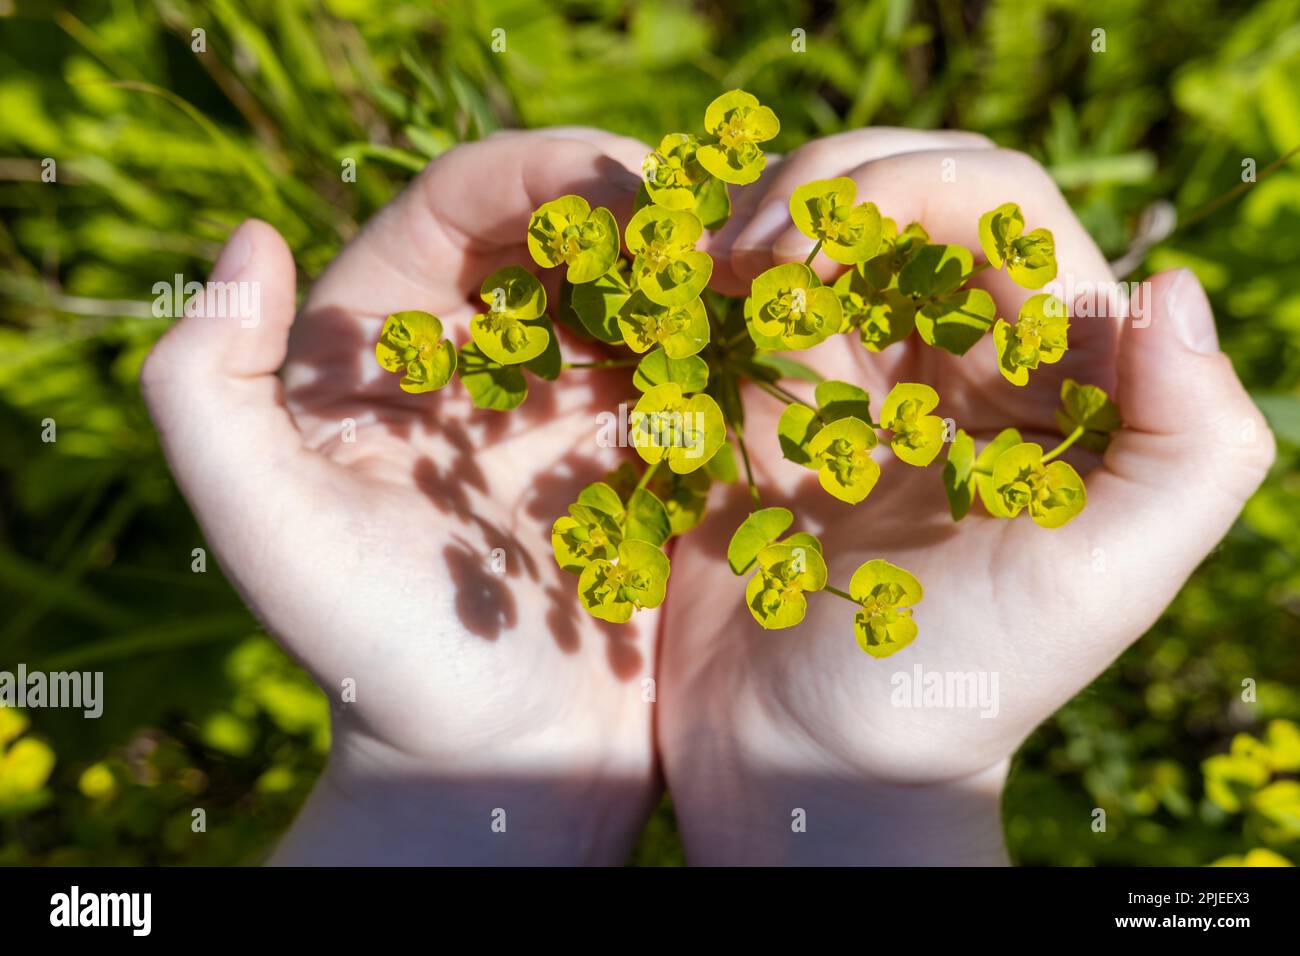 Women's palms holding a green flower, inflorescence in the meadow, showing the concept of rural life, wellness, springtime Stock Photo